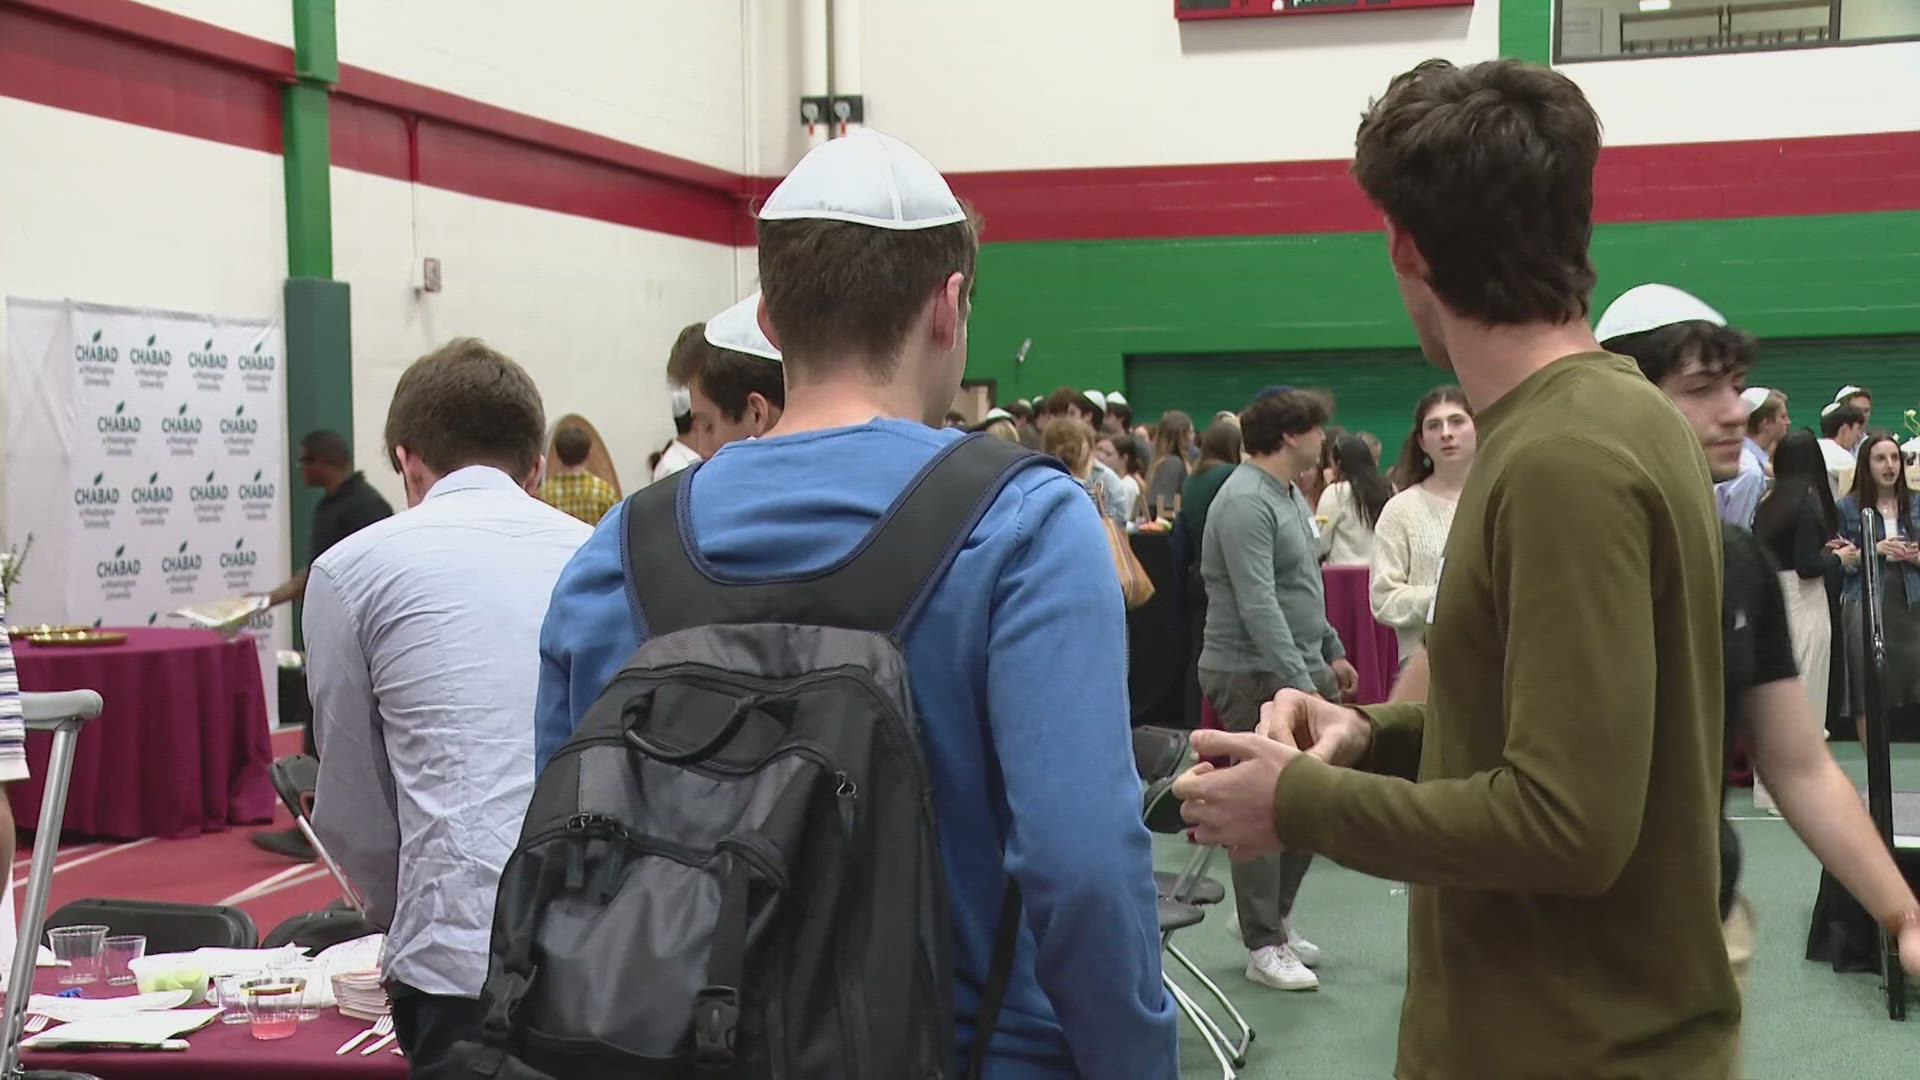 Local Jews gathered together to celebrate Passover. One location included the Wash U campus.